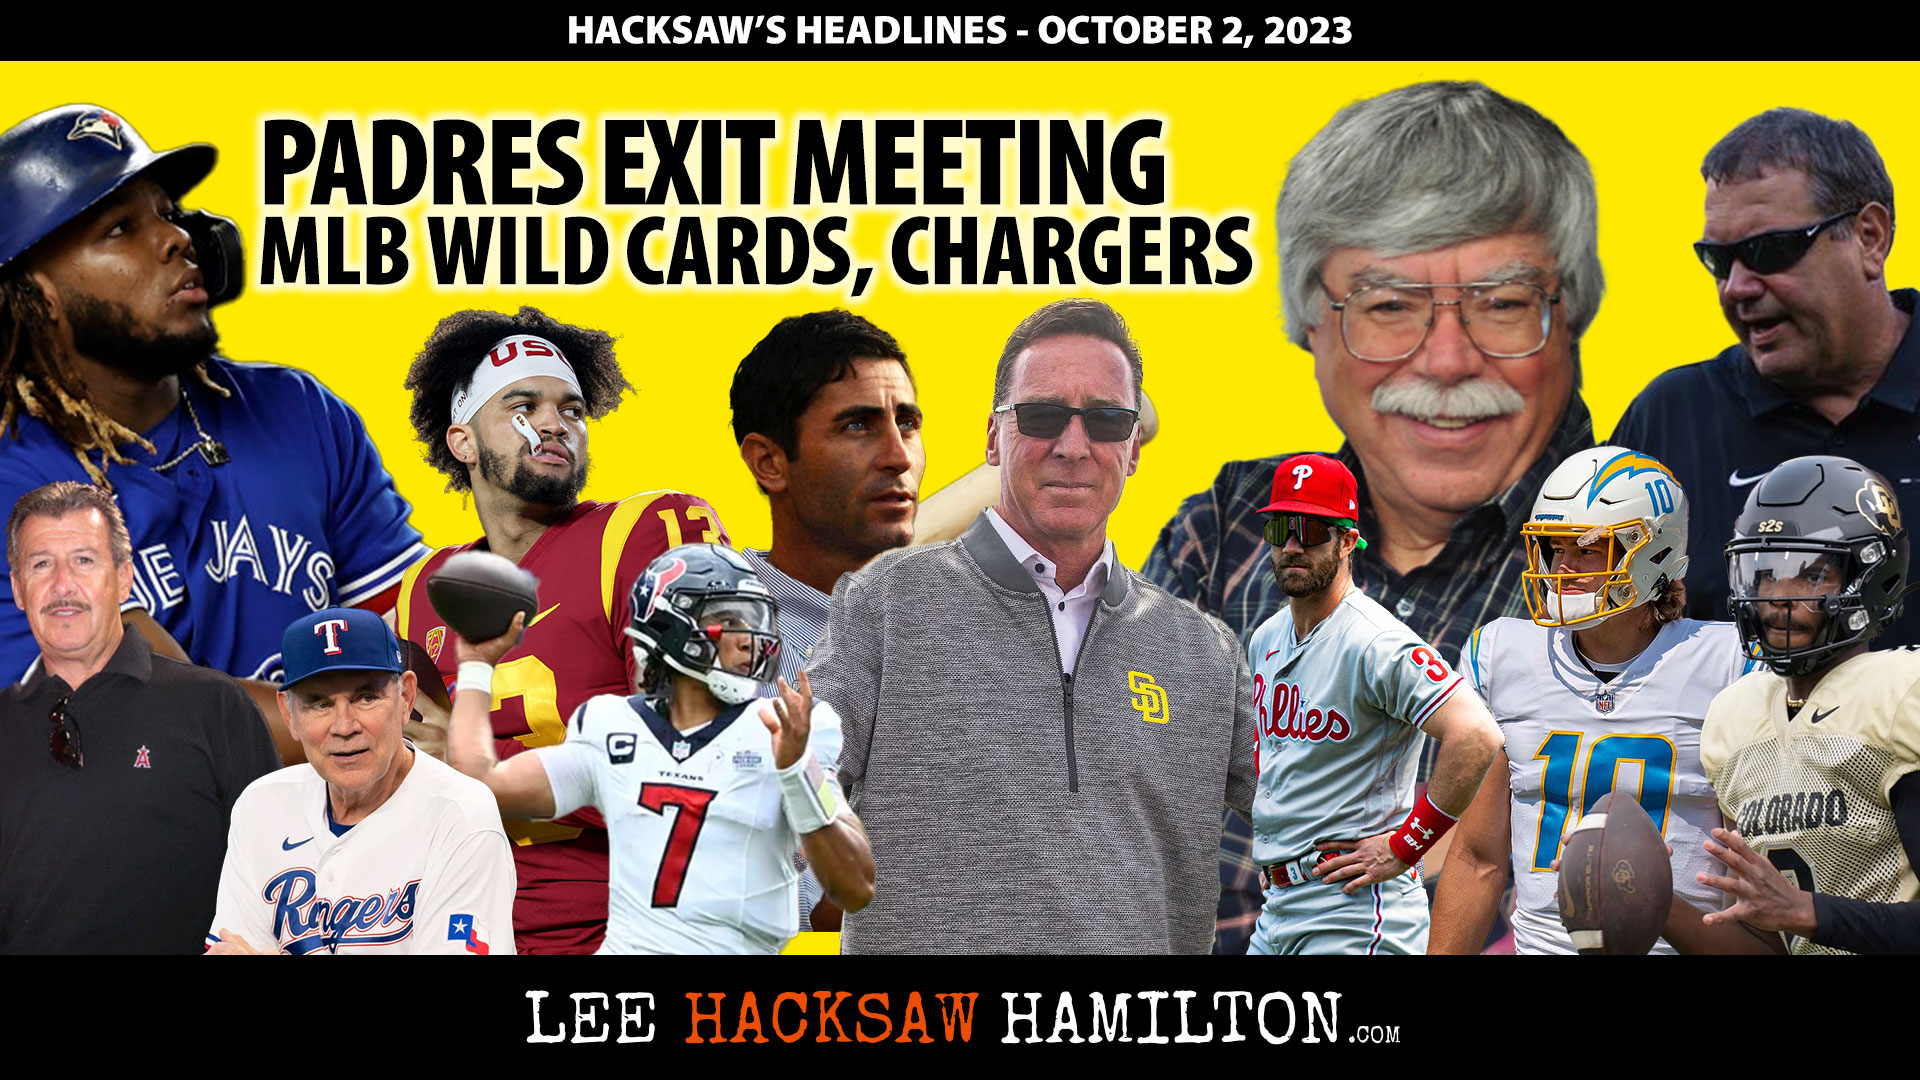 Lee Hacksaw Hamilton discusses Padres Exit Meeting, MLB Wild Cards, Angels, Chargers, Raiders, Aztecs, Trojans, Flames, Ryder Cup